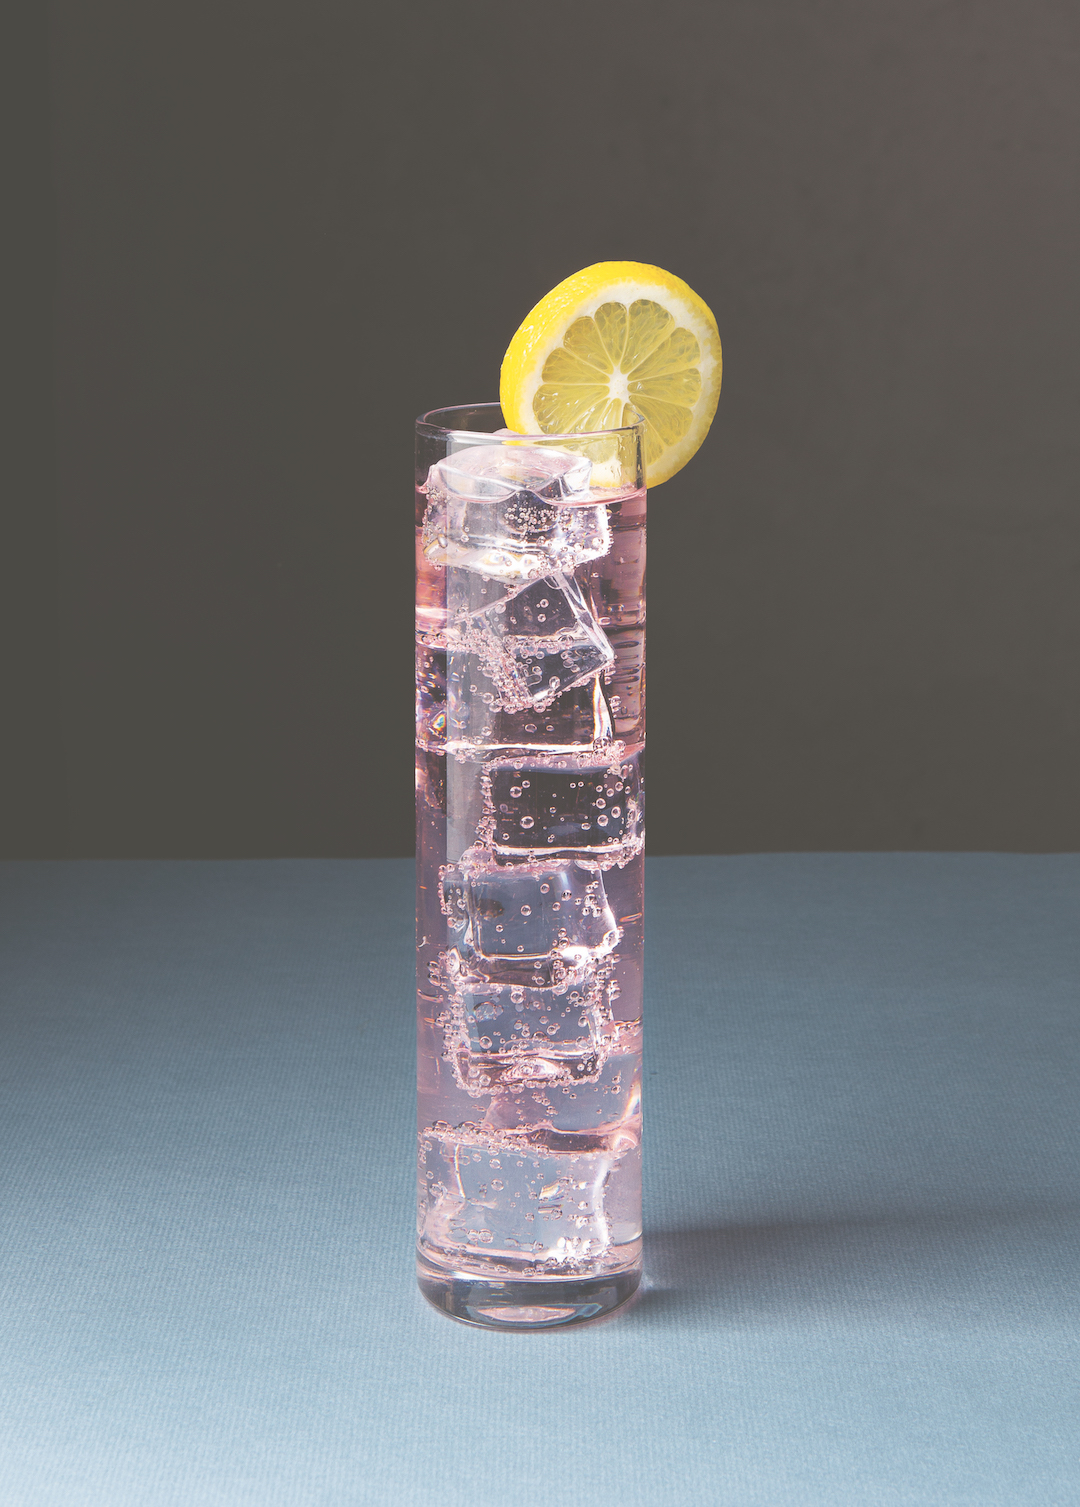 Highball, as featured in Spirited. All photographs by Andy Sewell